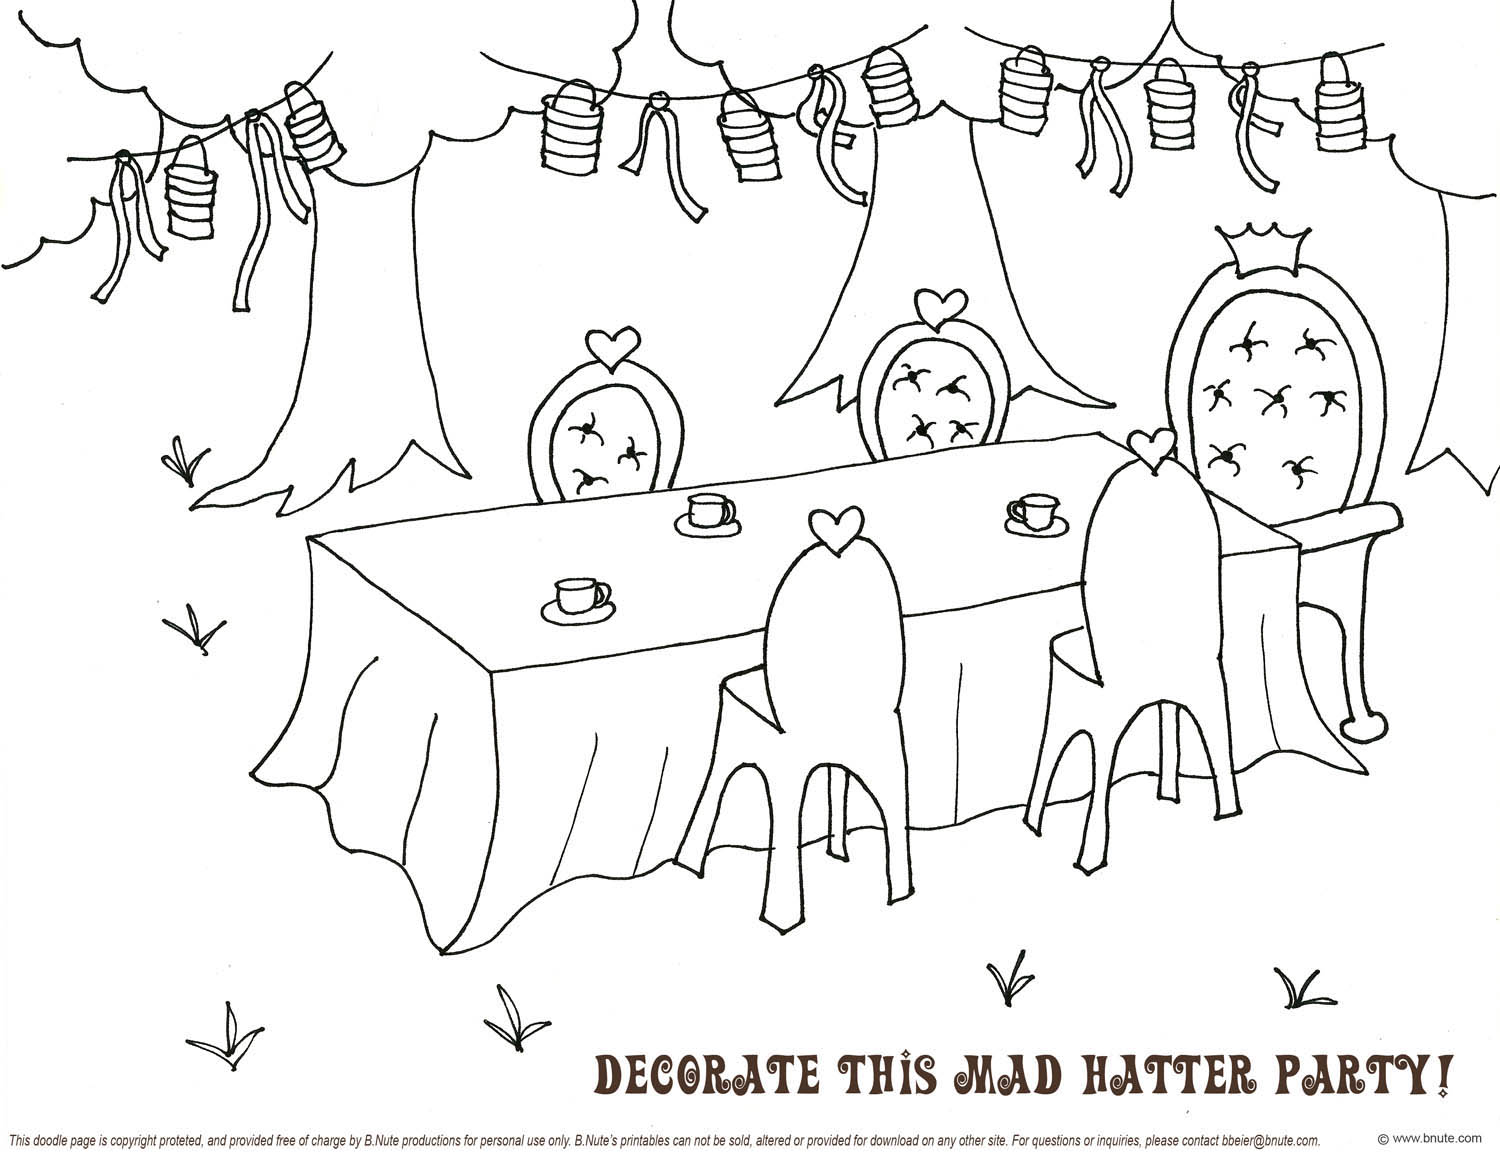 Bnute Productions October 2010 This is the for fun coloring page. bnute productions october 2010